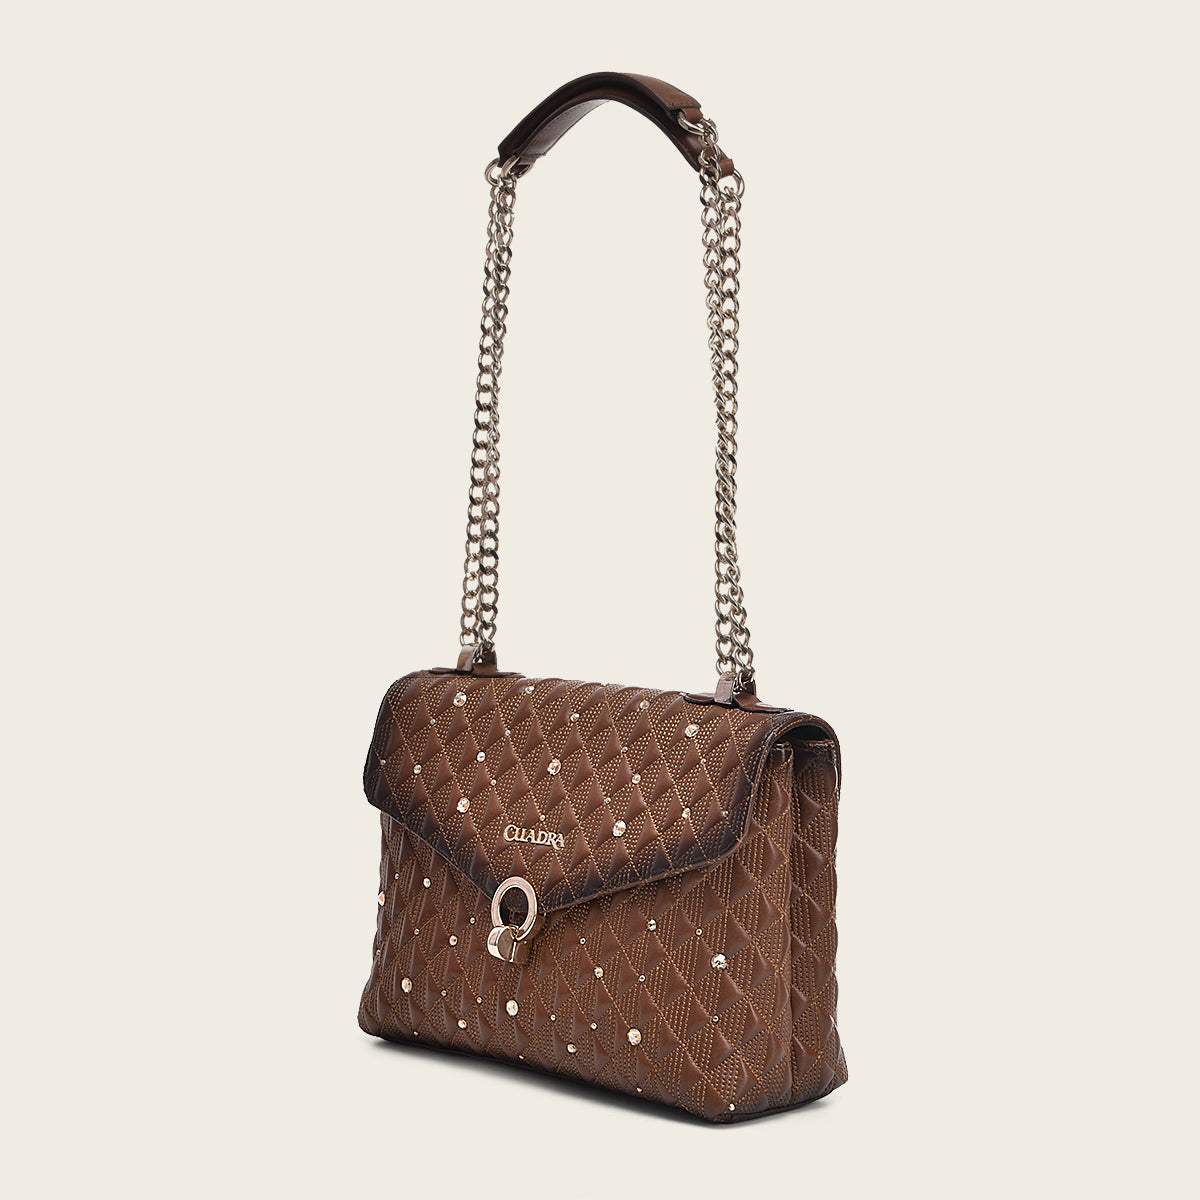 Brown leather crossbody bag with doble chain handle